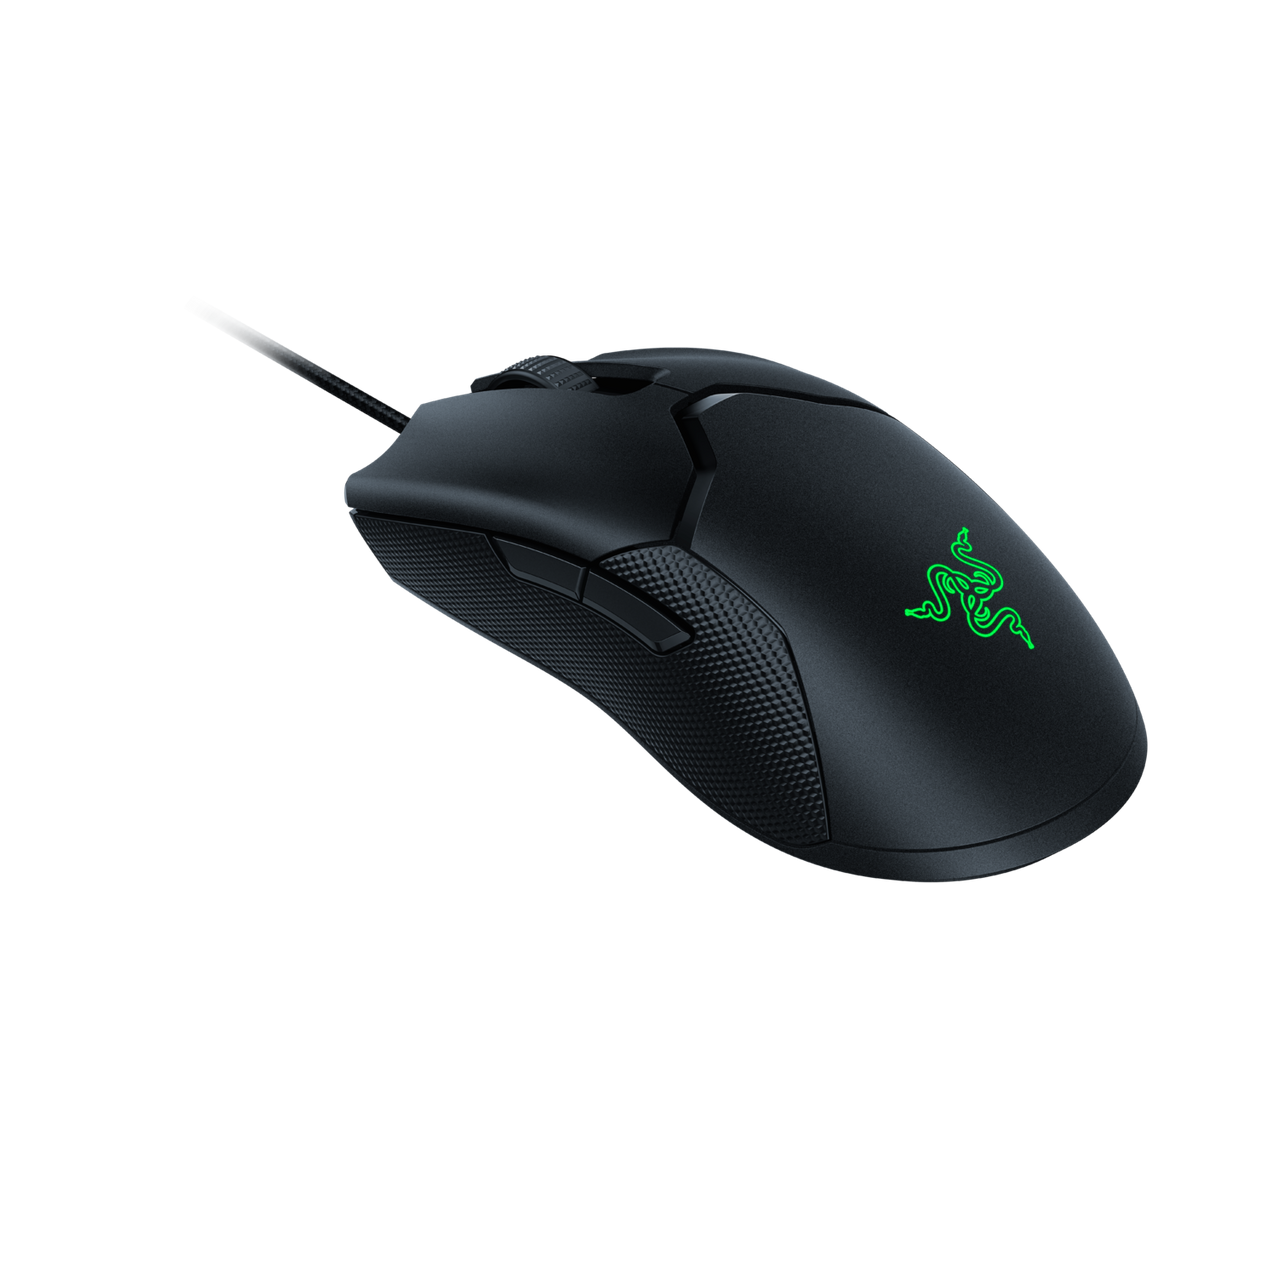 Razer Viper Wired USB Optical Mouse Review